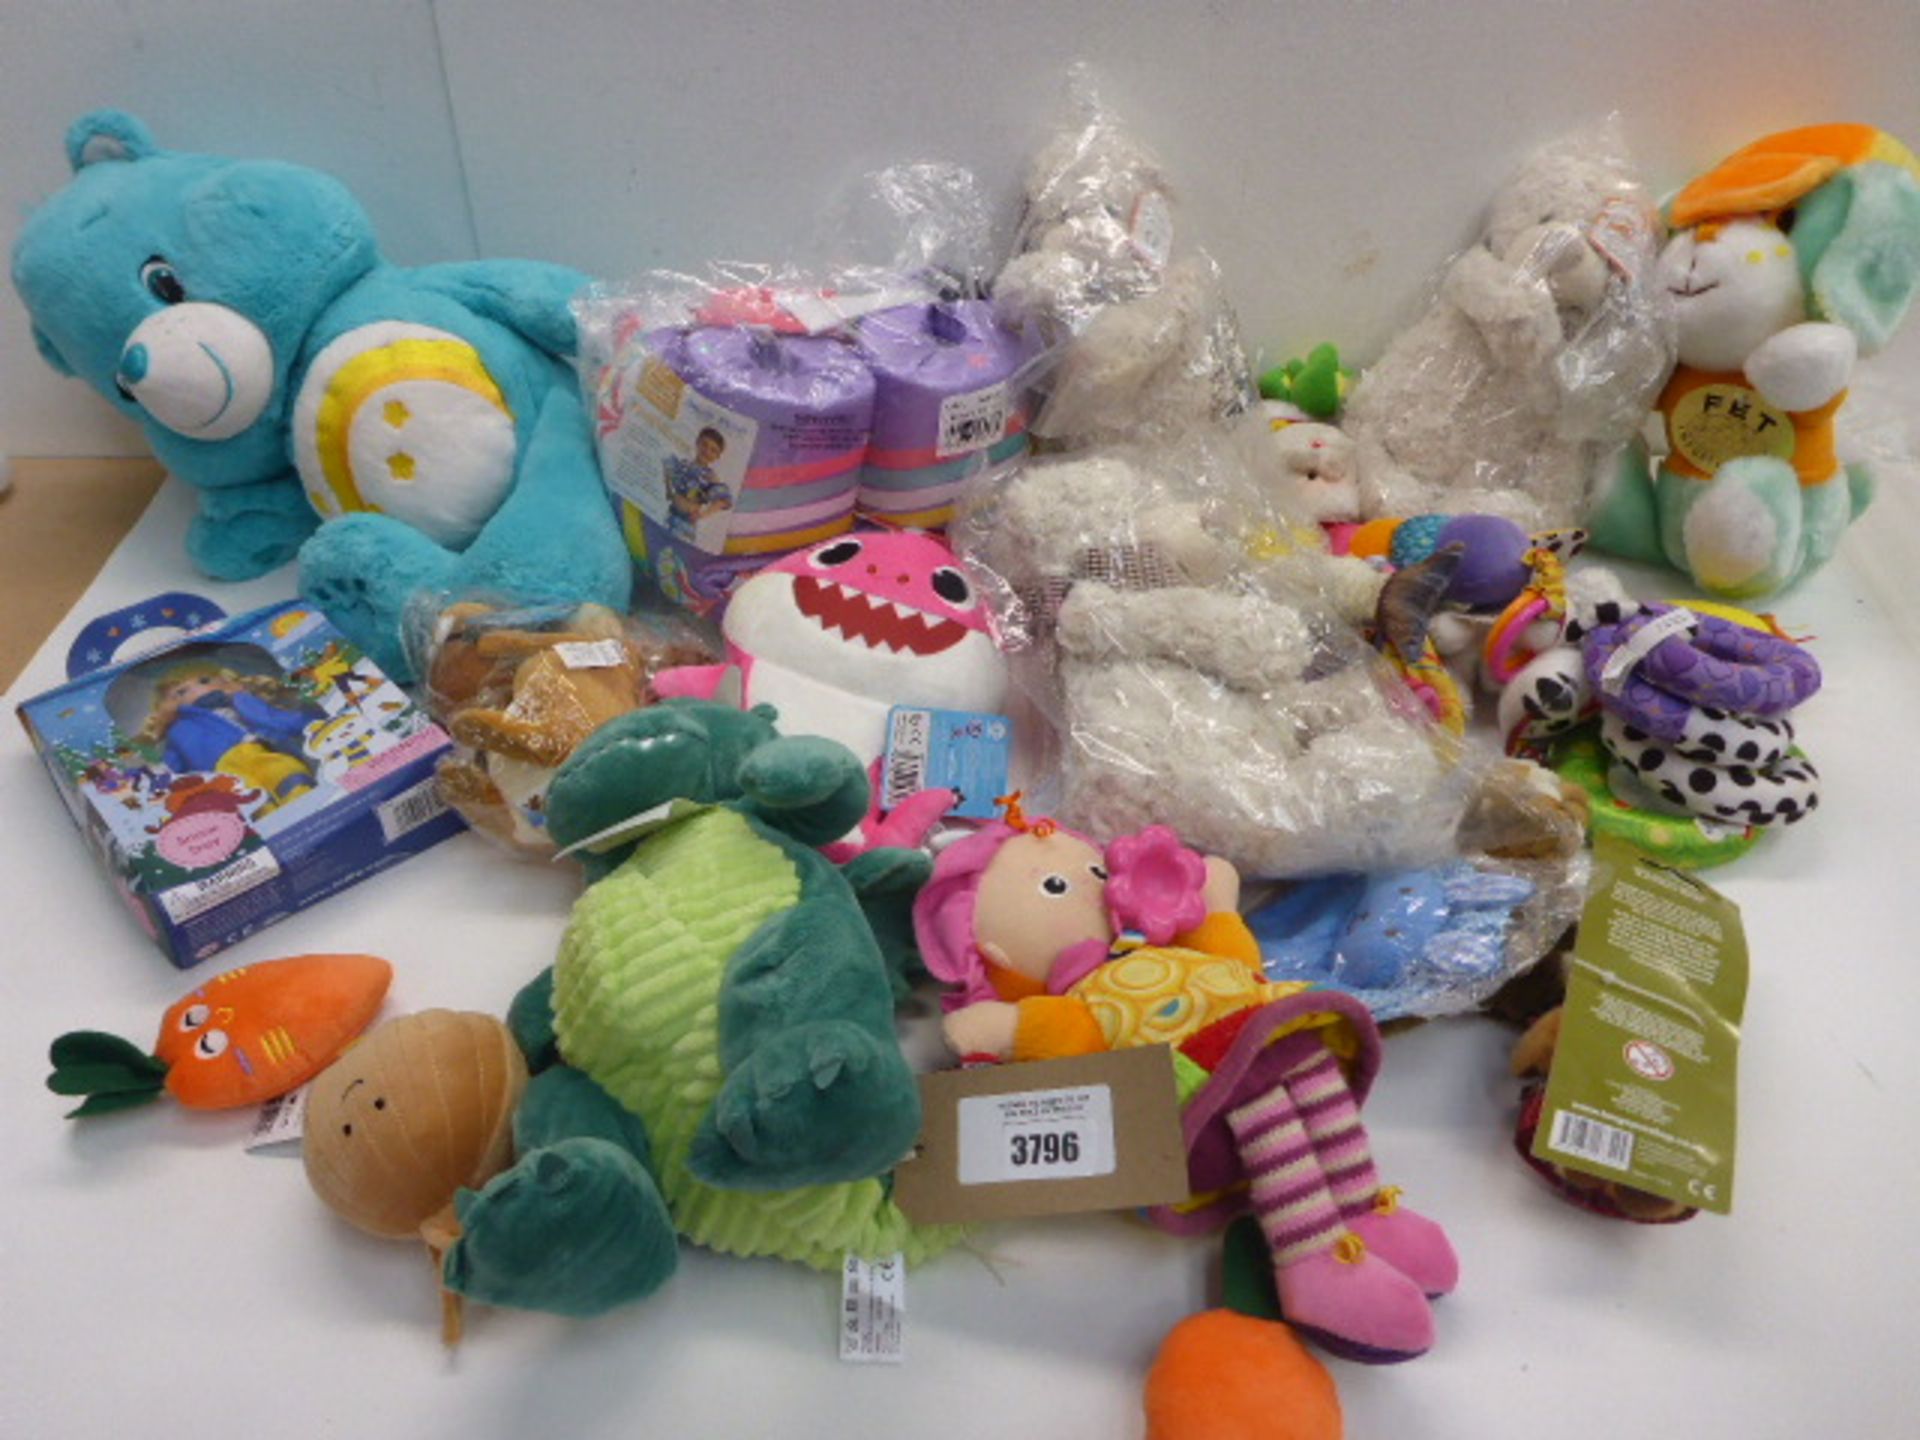 Selection of soft cuddly toys and dolls